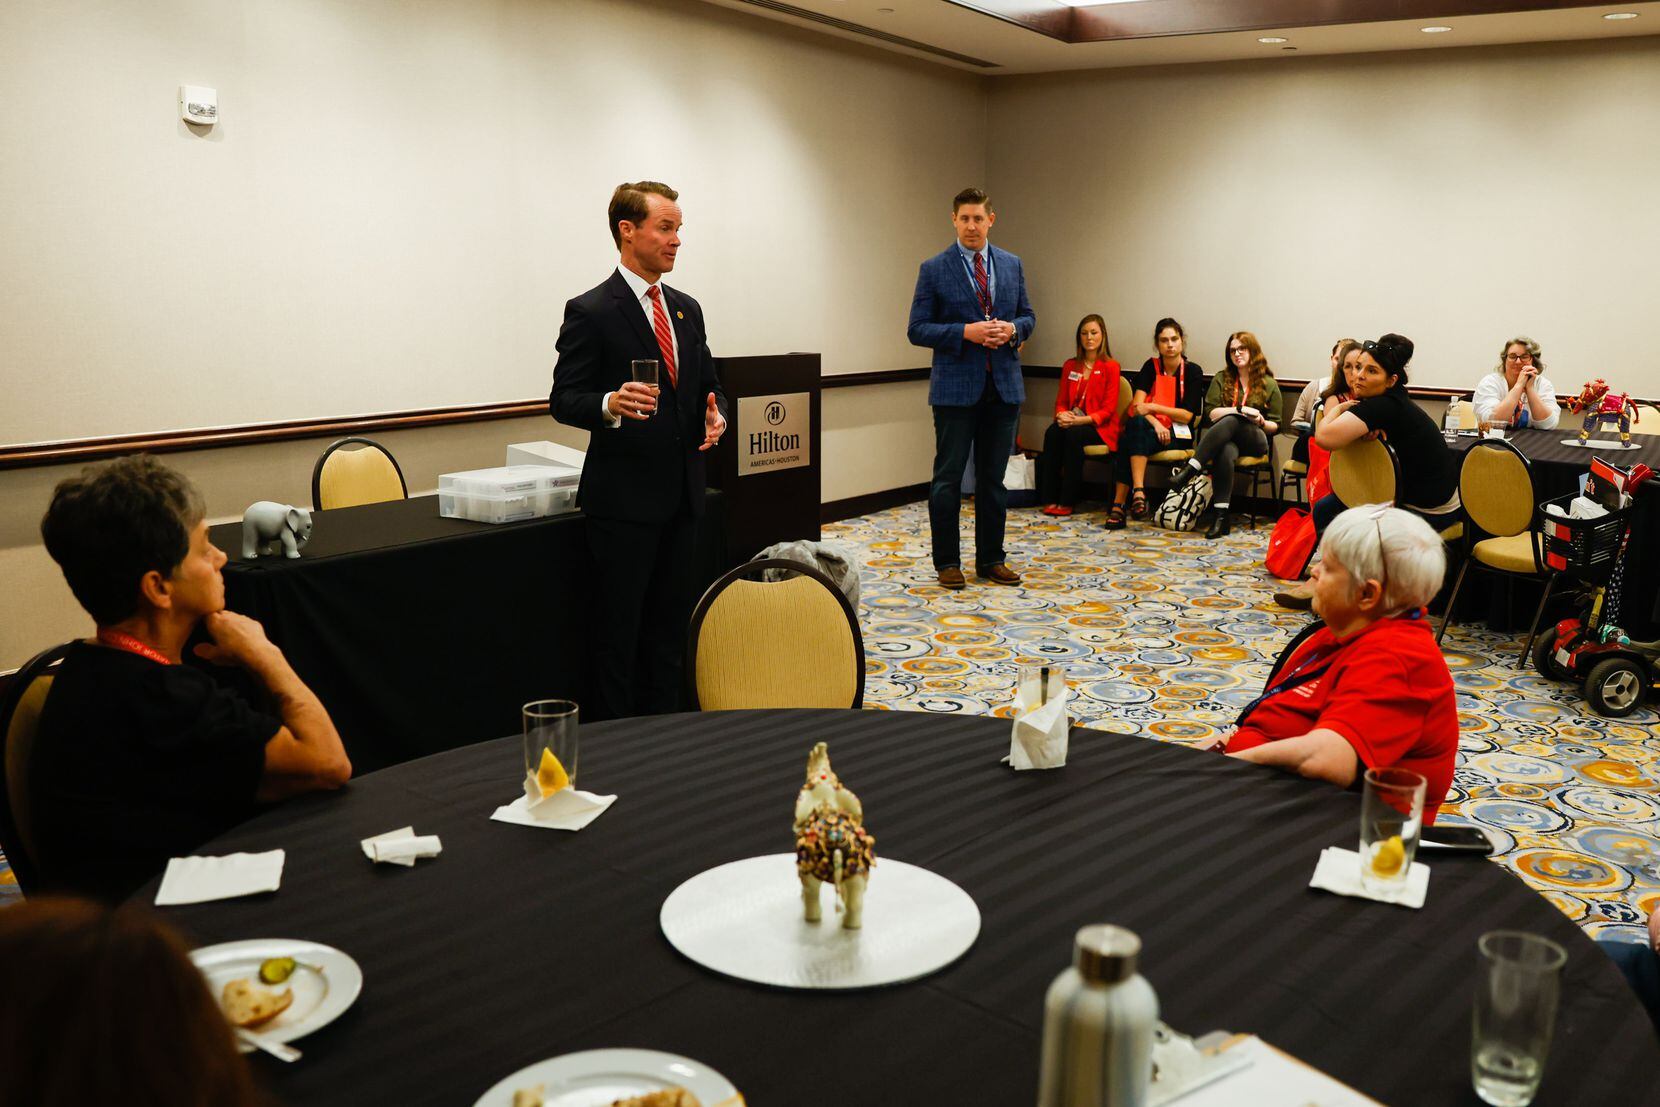 Dade Phelan, speaker of the Texas House of Representatives, addressed the audience during a...